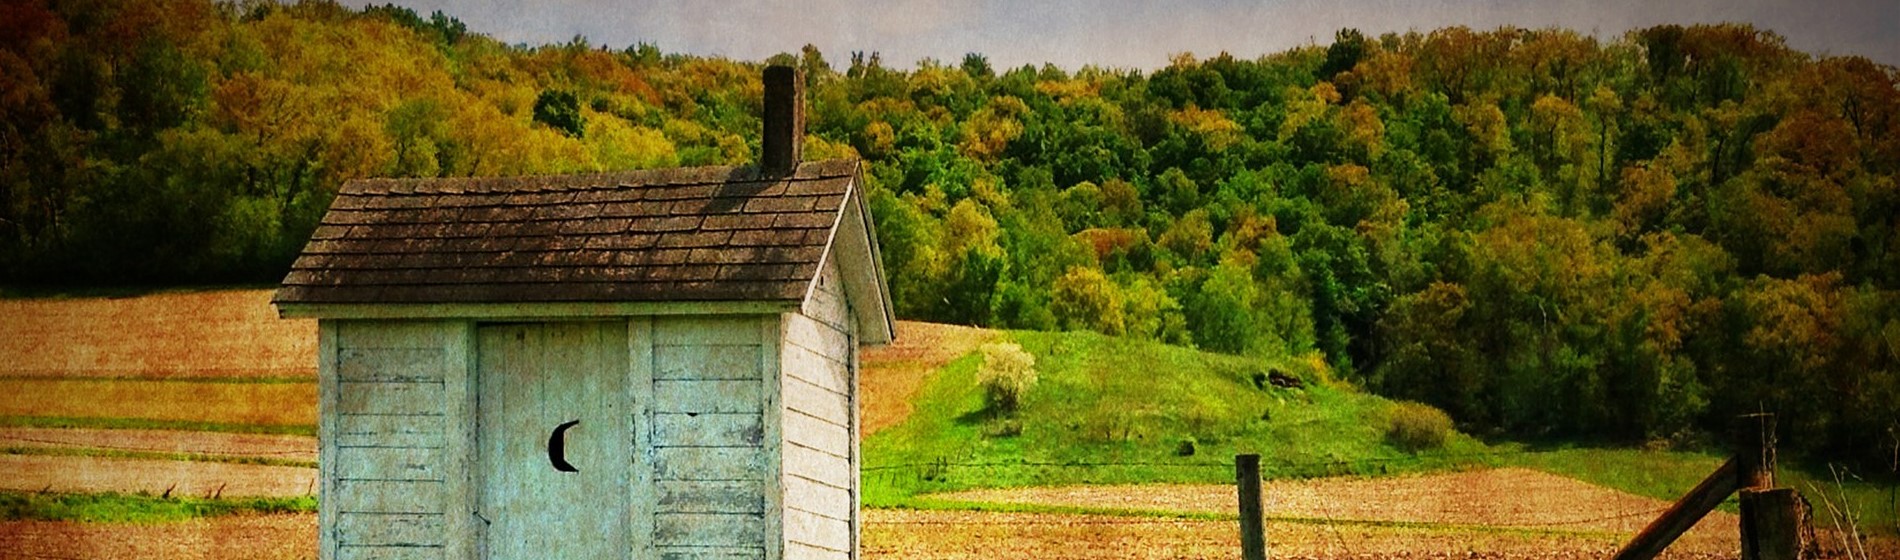 outhouse in countryside